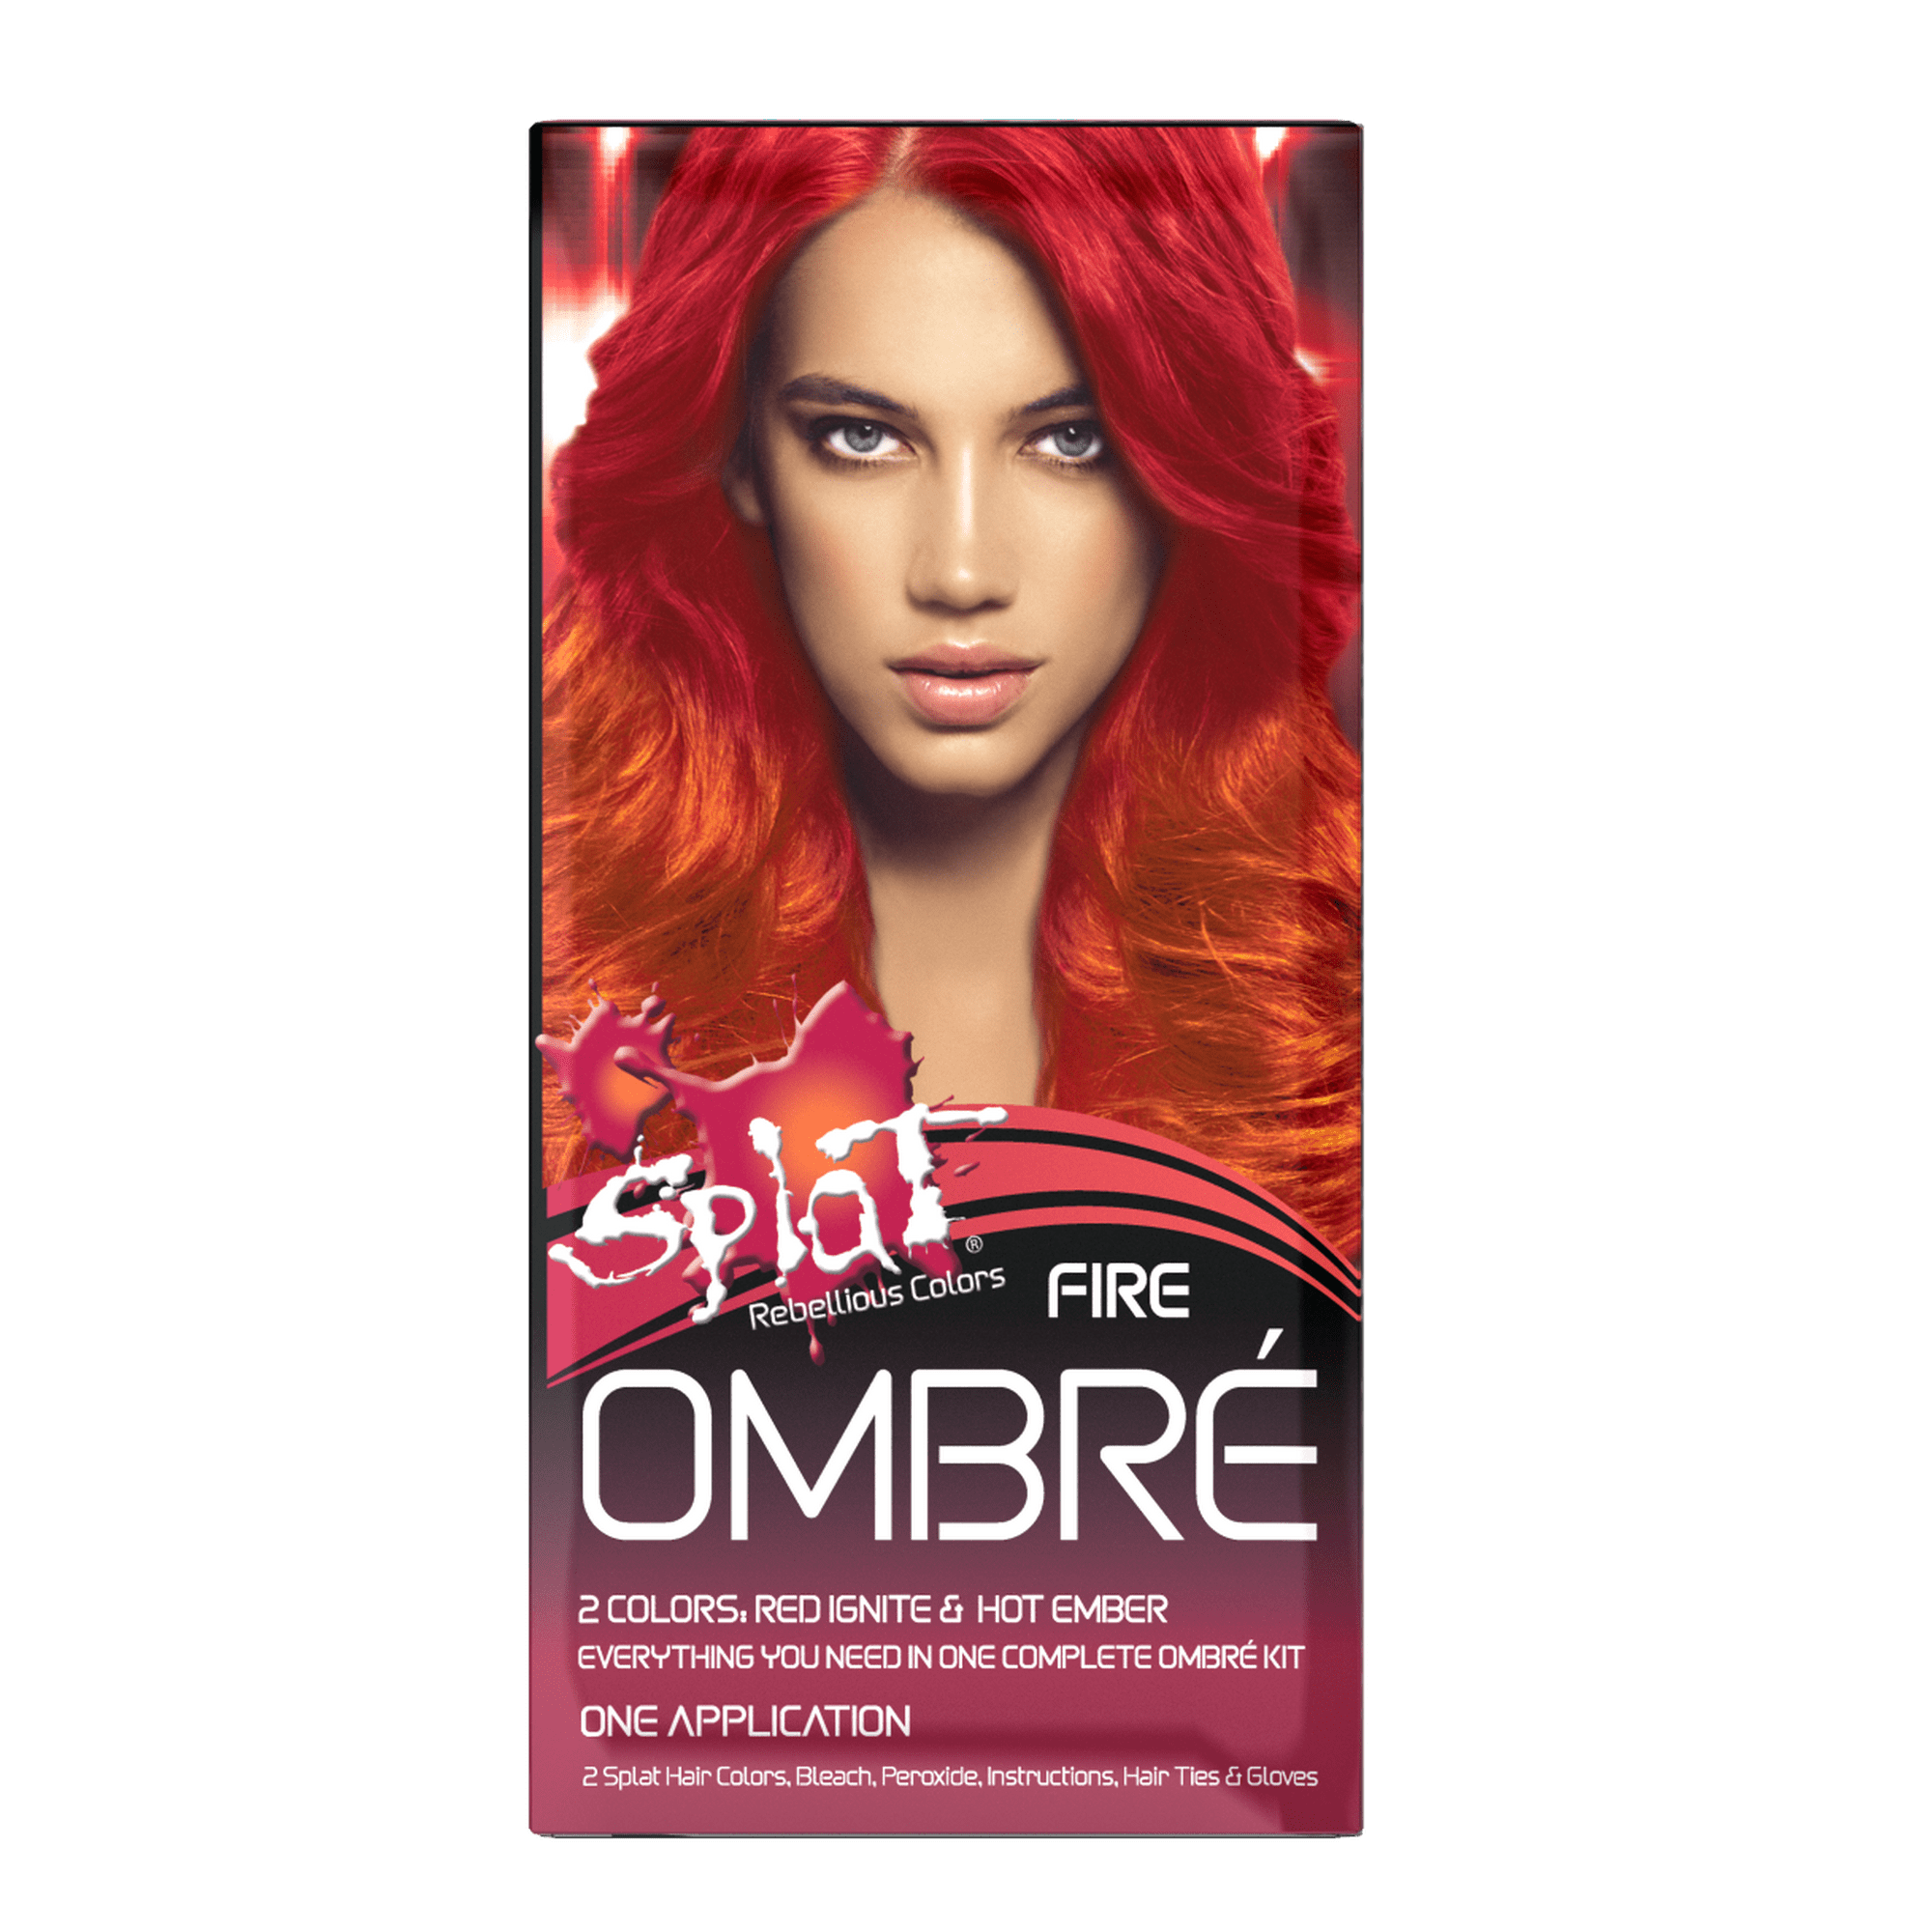 Splat Complete Kit, Ombre Fire, Semi-Permanent Orange & Red Hair Dye with Bleach